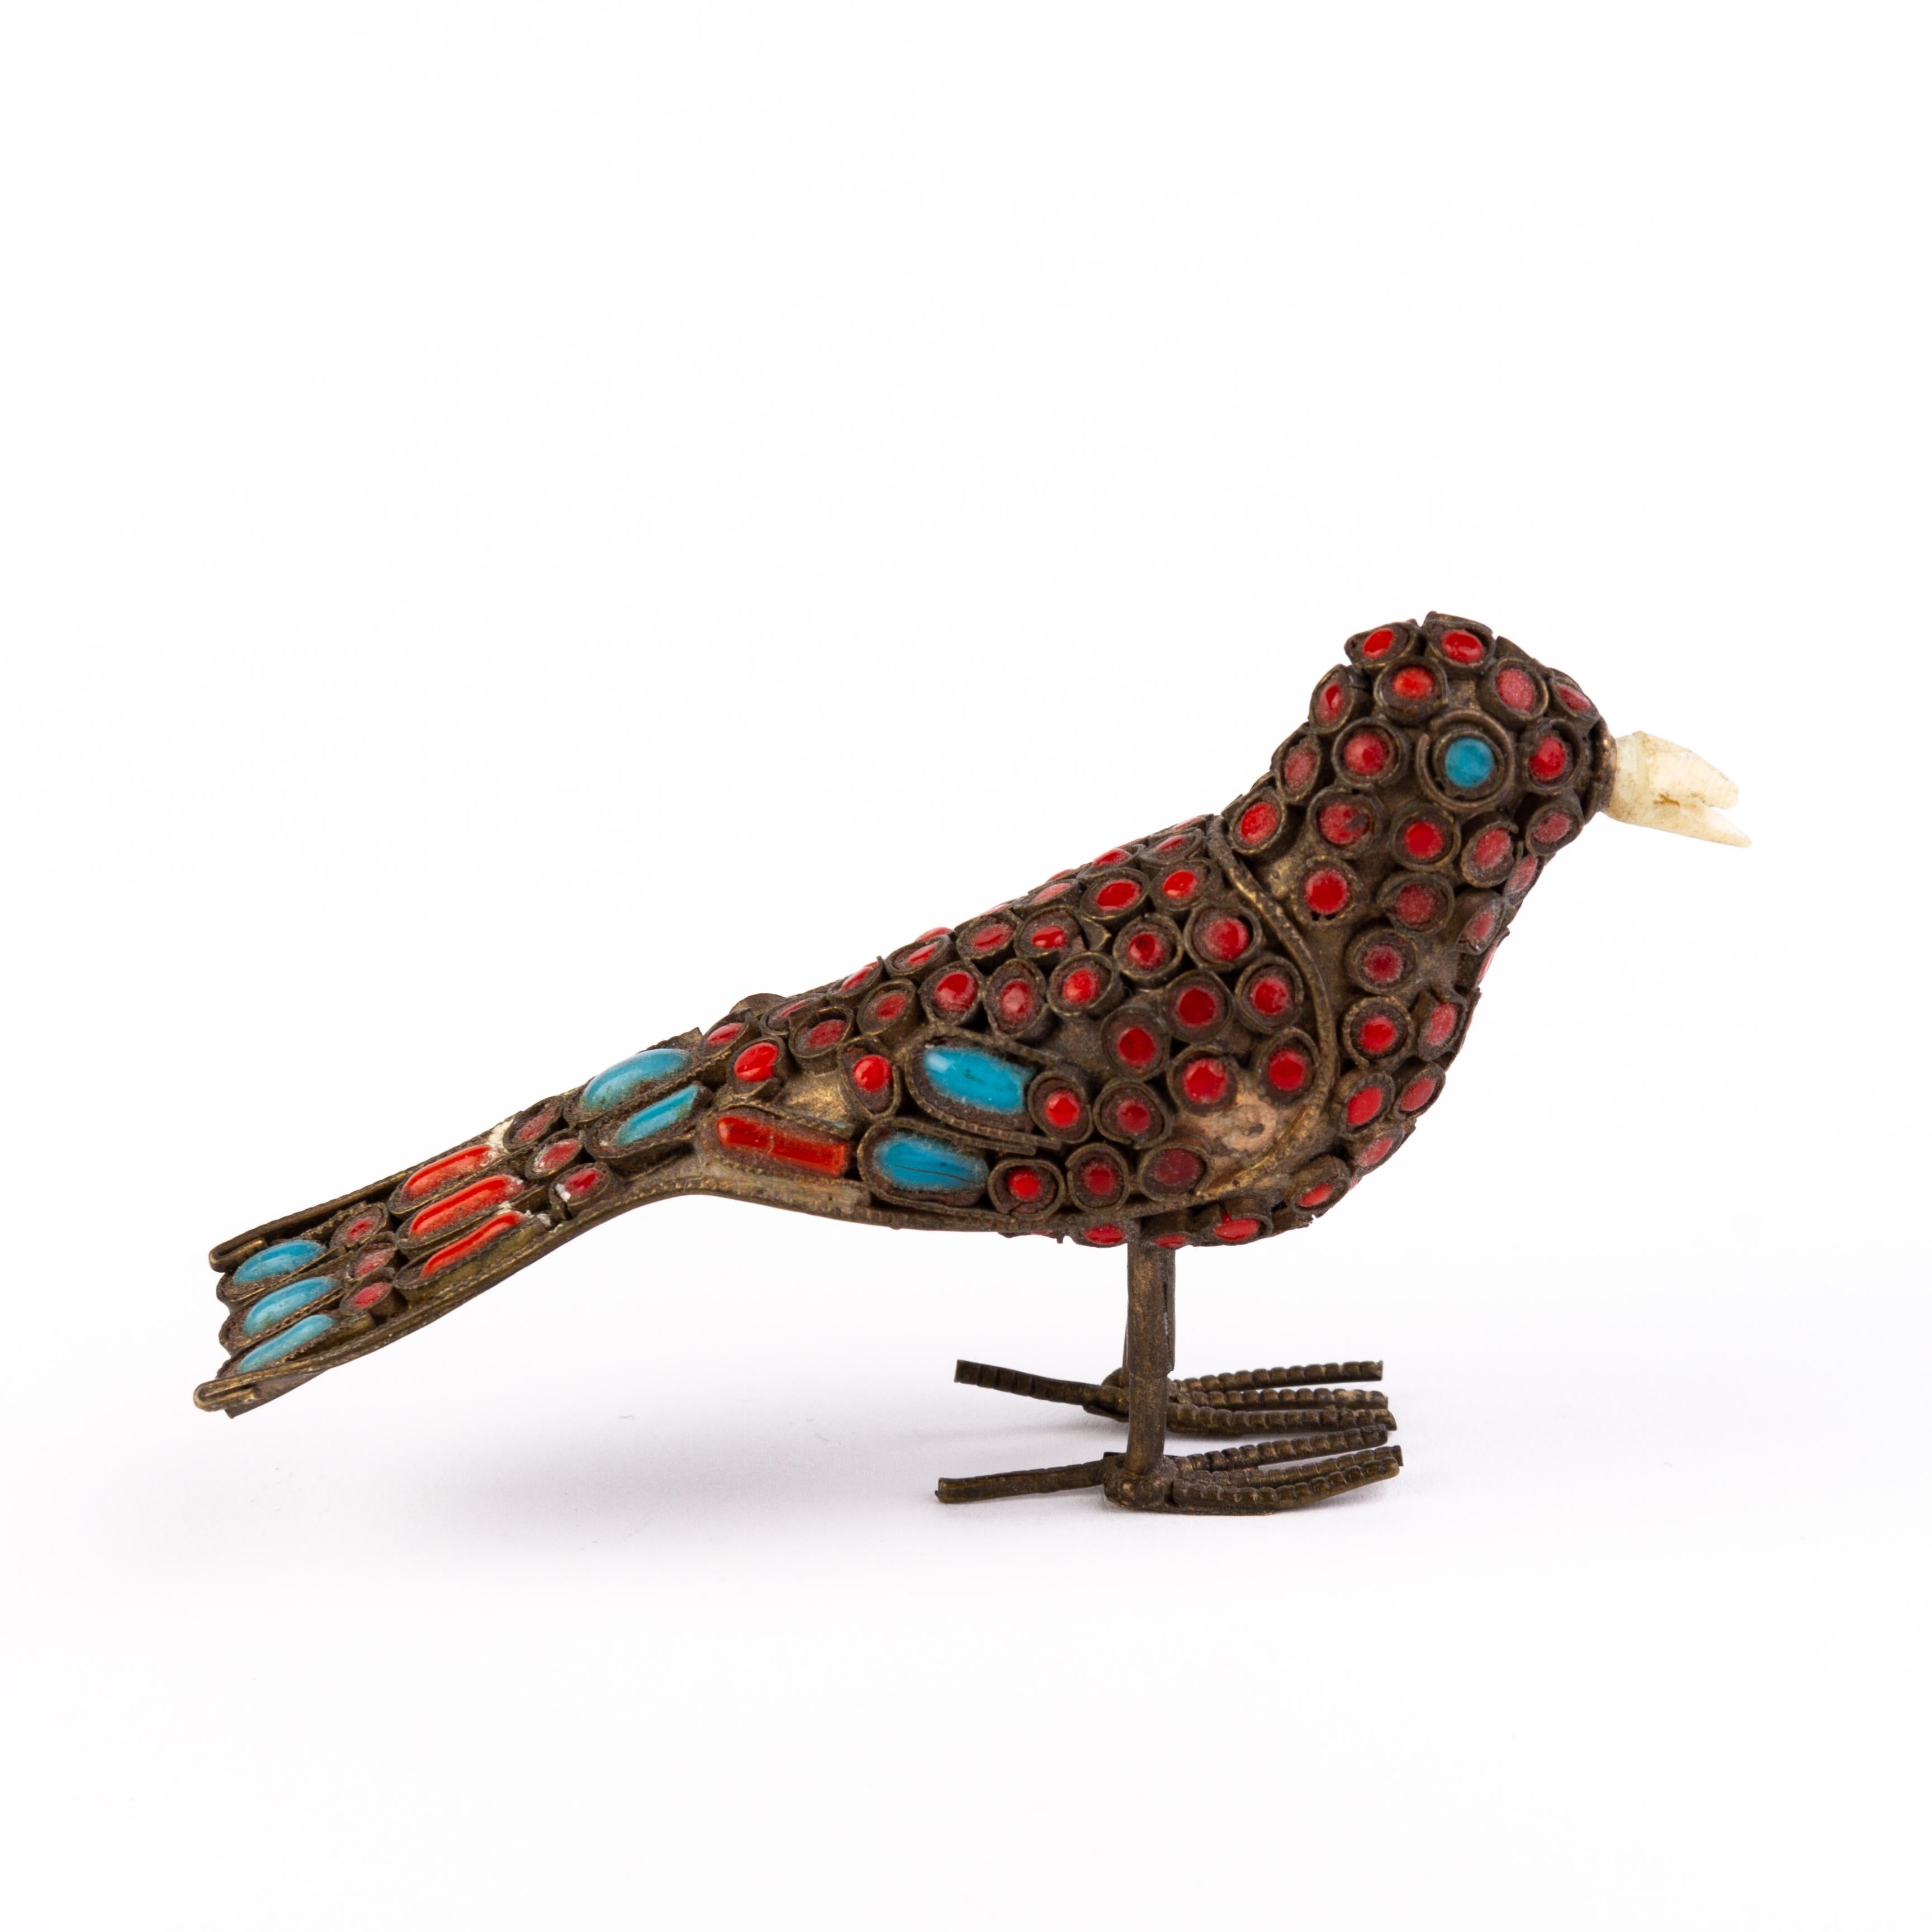 In good condition
From a private collection
Free international shipping
Chinese Tibetan Turquoise & Coral Bird Sculpture 19th Century